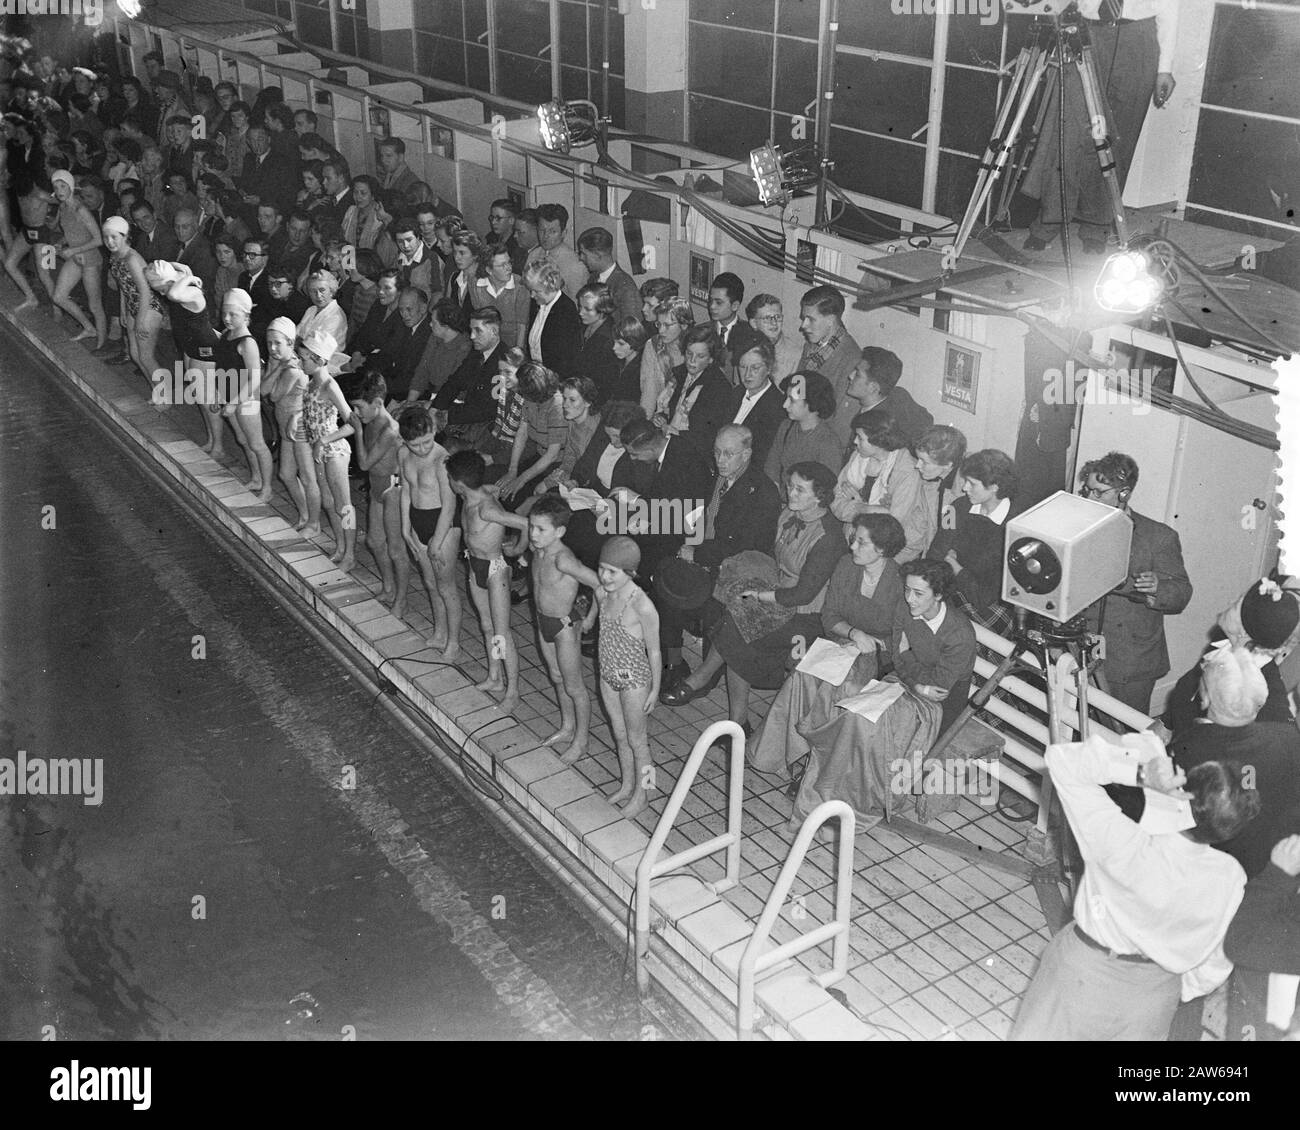 Ã n the swimming stadium in Naarden National swimming competitions were organized by the AVRO. These games in a direct television broadcast aired Date: January 11, 1952 Location: Naarden Keywords: sports, television, swimming Institution Name: Avro Stock Photo